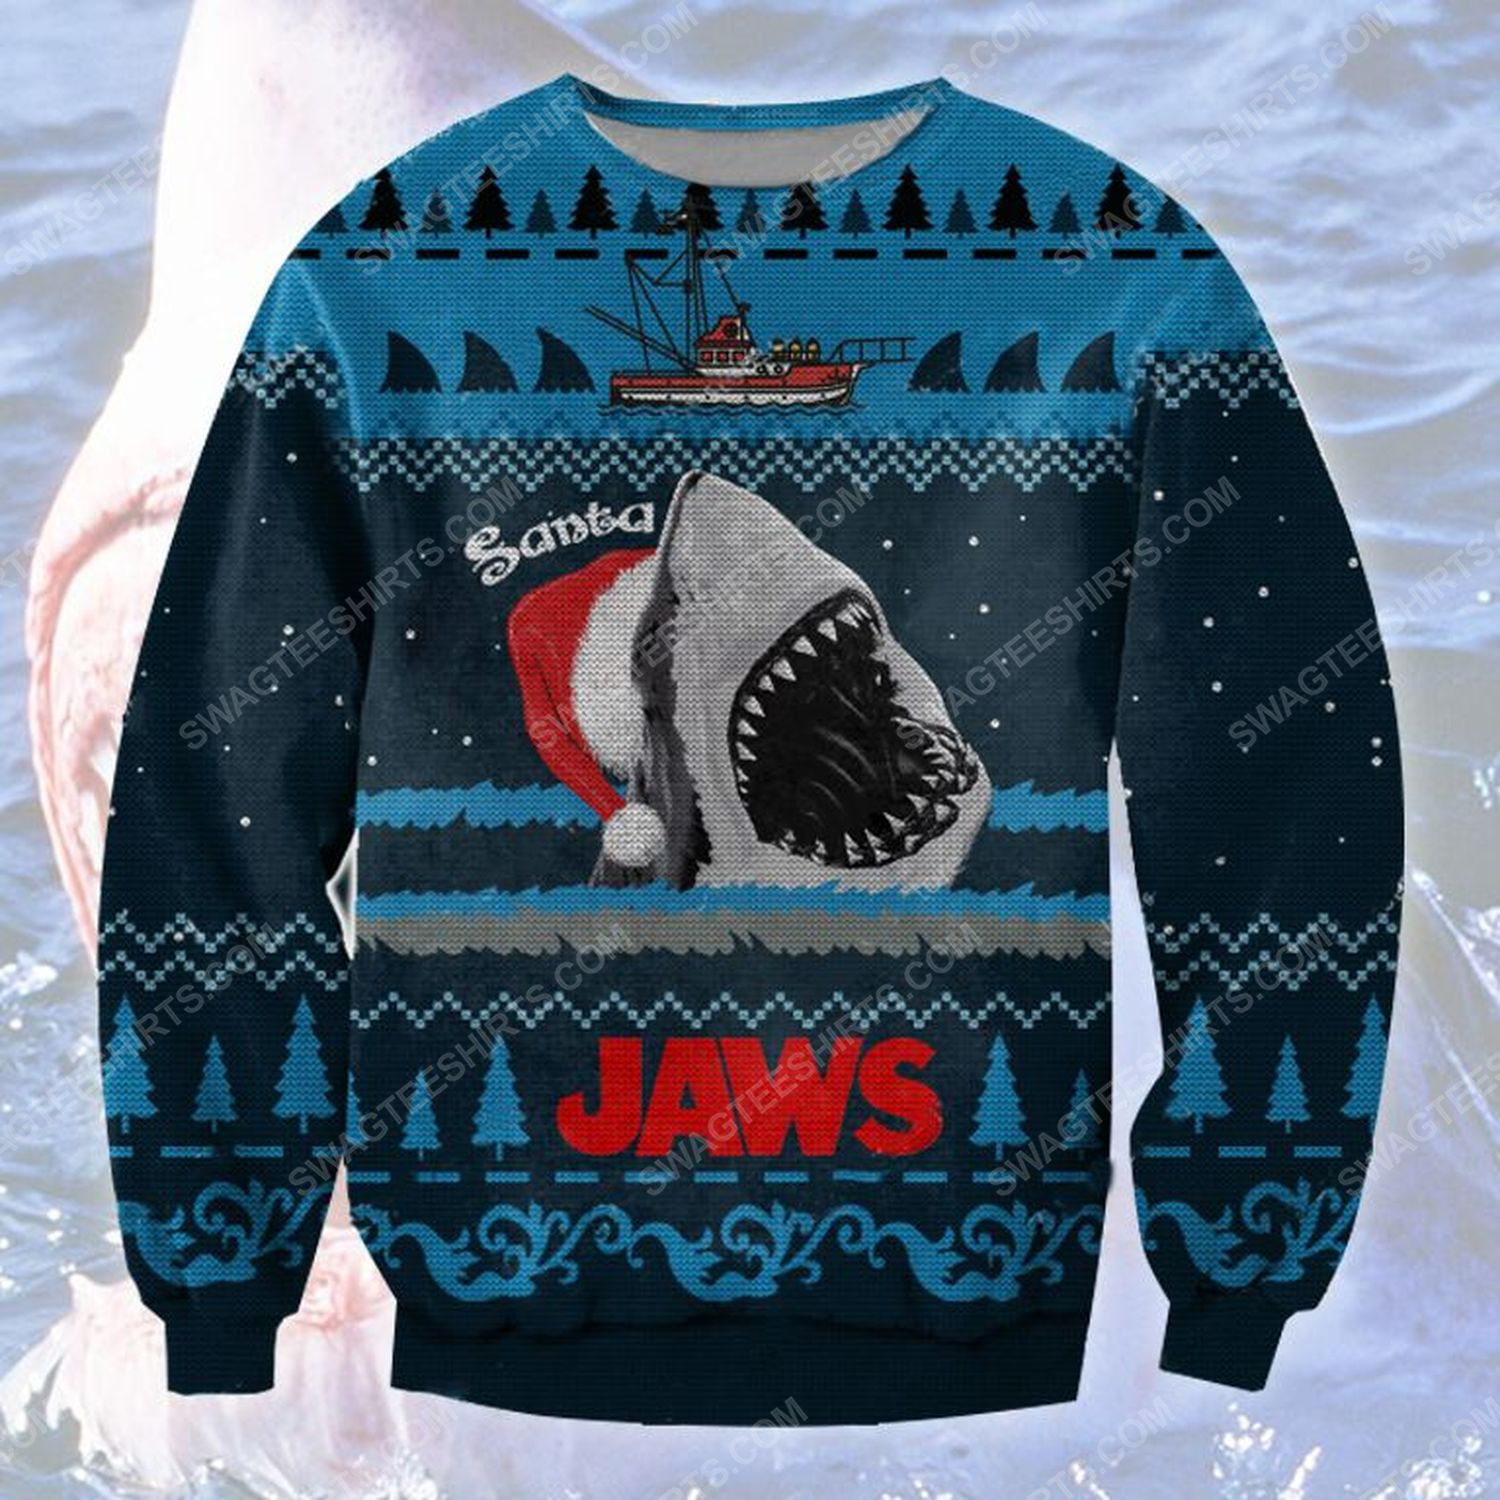 [special edition] Santa jaws ugly christmas sweater – maria